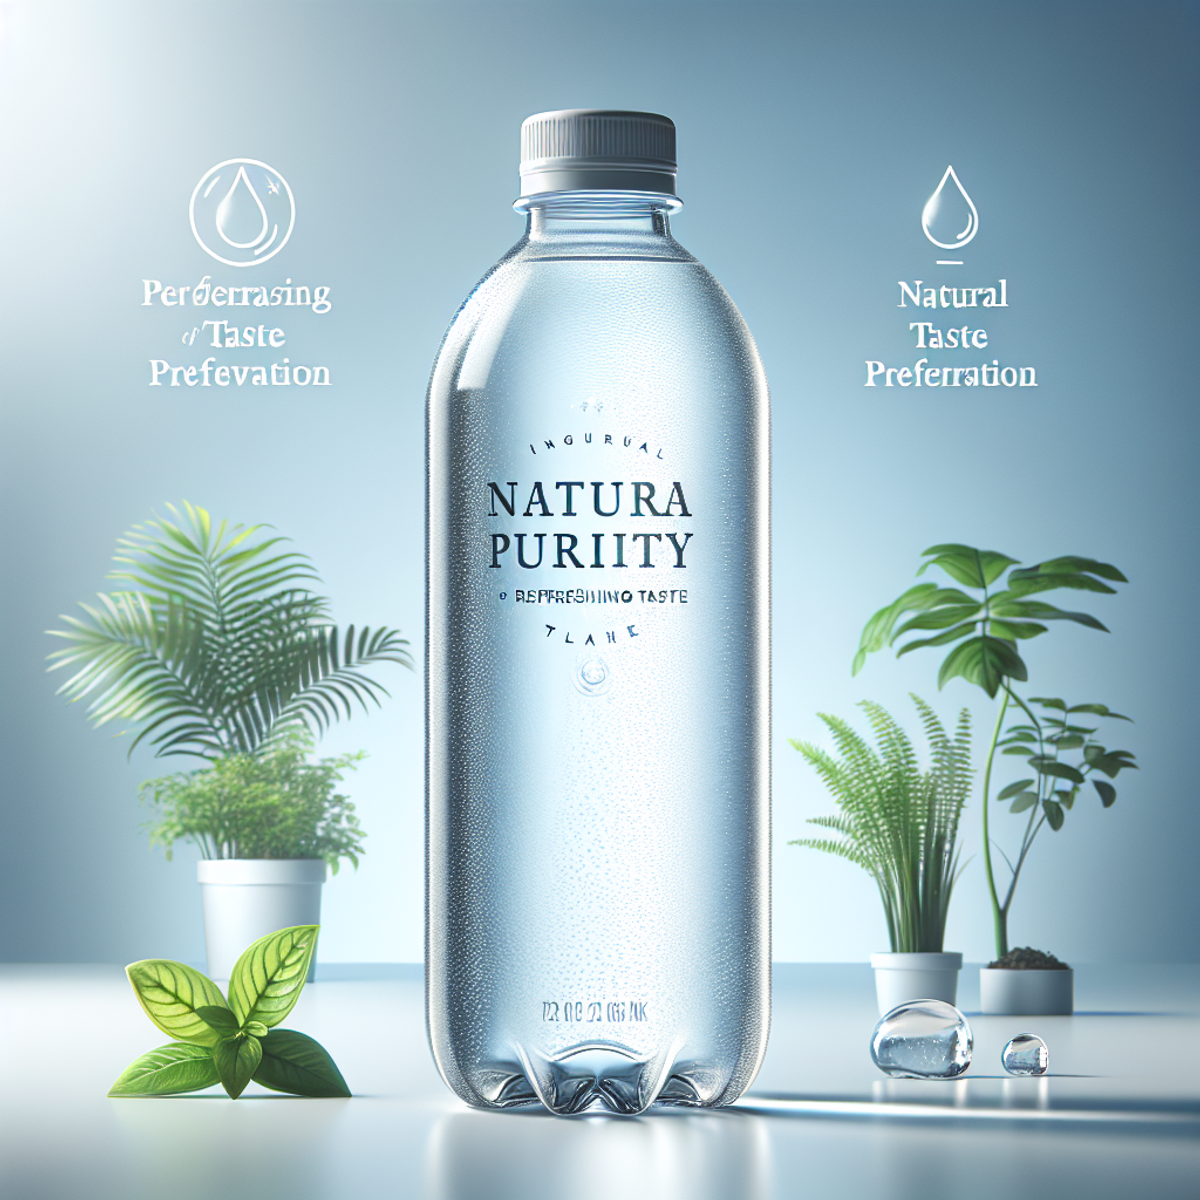 A clear glass water bottle with a sleek lid, positioned in a natural setting to emphasize purity and freshness.